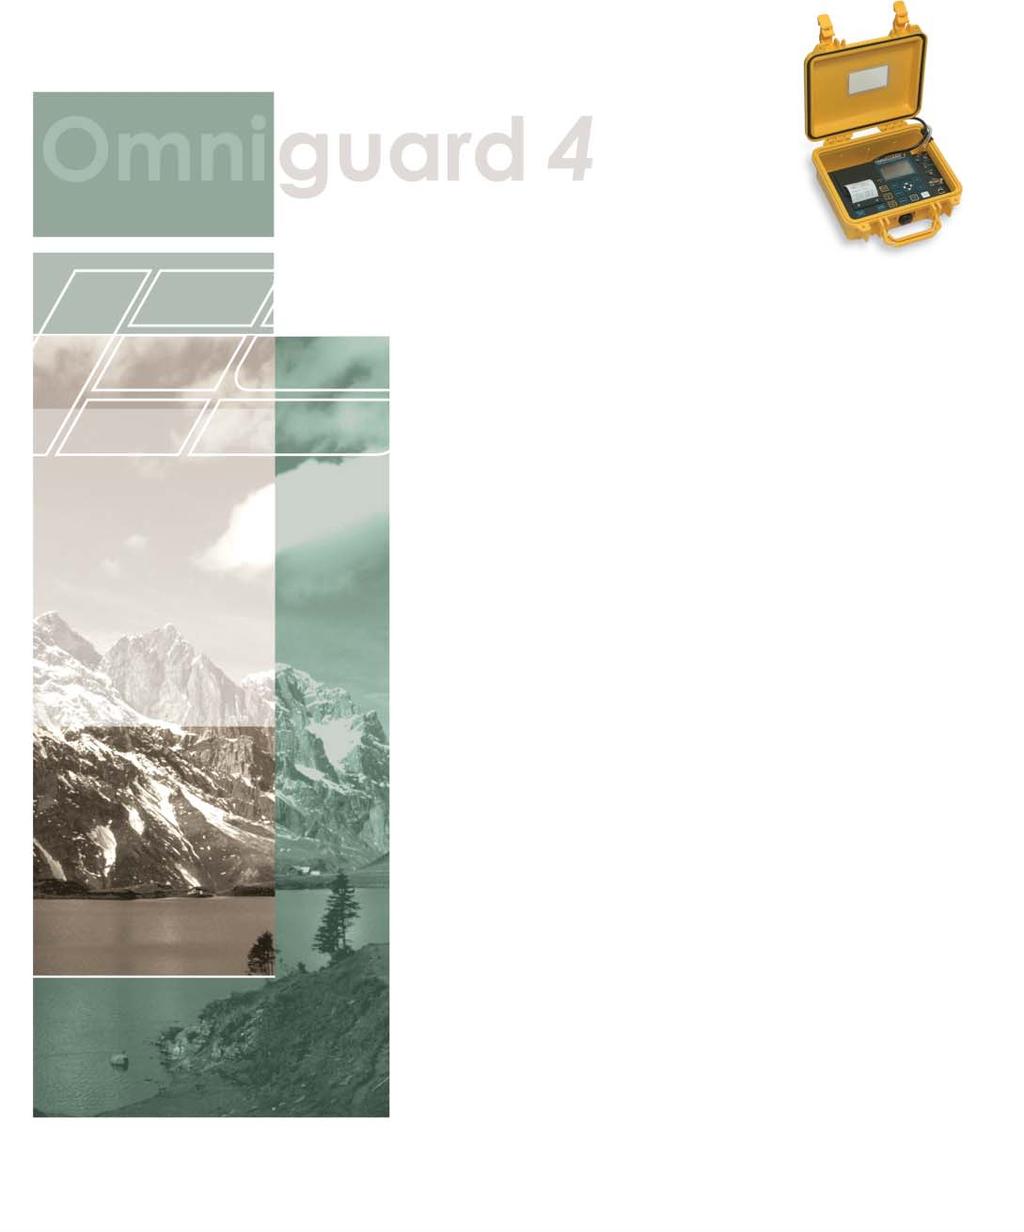 Omniguard 4: Features The Omniguard 4 utilizes state of the art pressure measurement technology to accurately document vacuum and pressure inside a containment